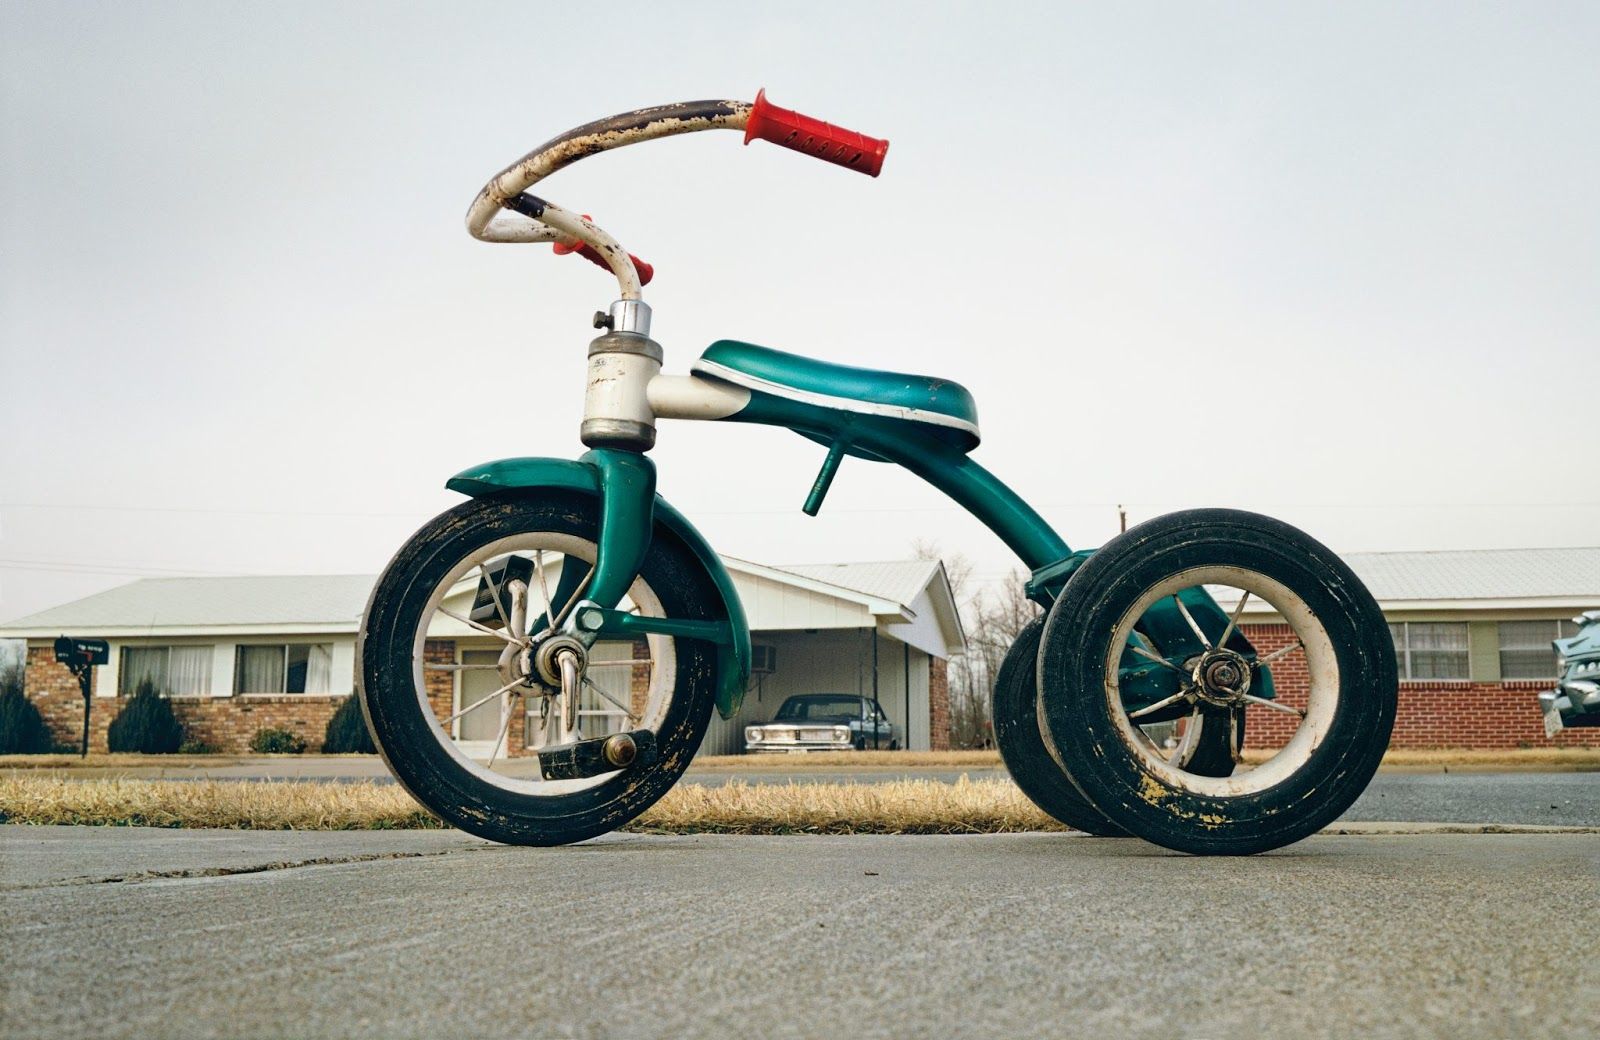 William Eggleston’s famous tricycle picture, an example of everyday photography.